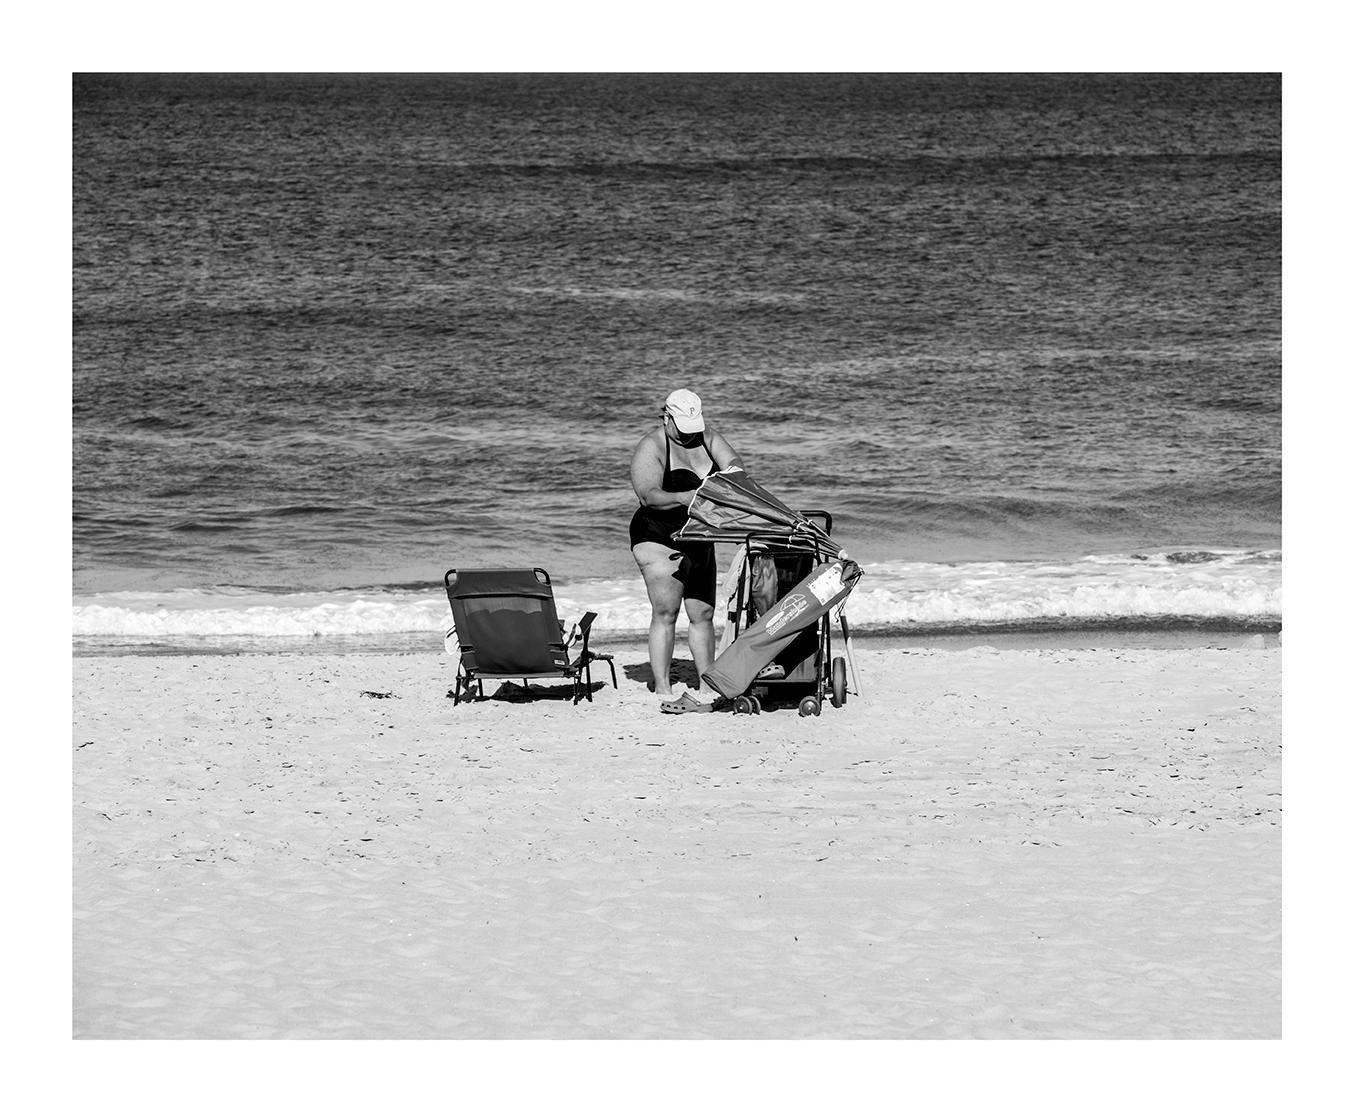 Packing up after a day at the beach, Ocean City, Maryland